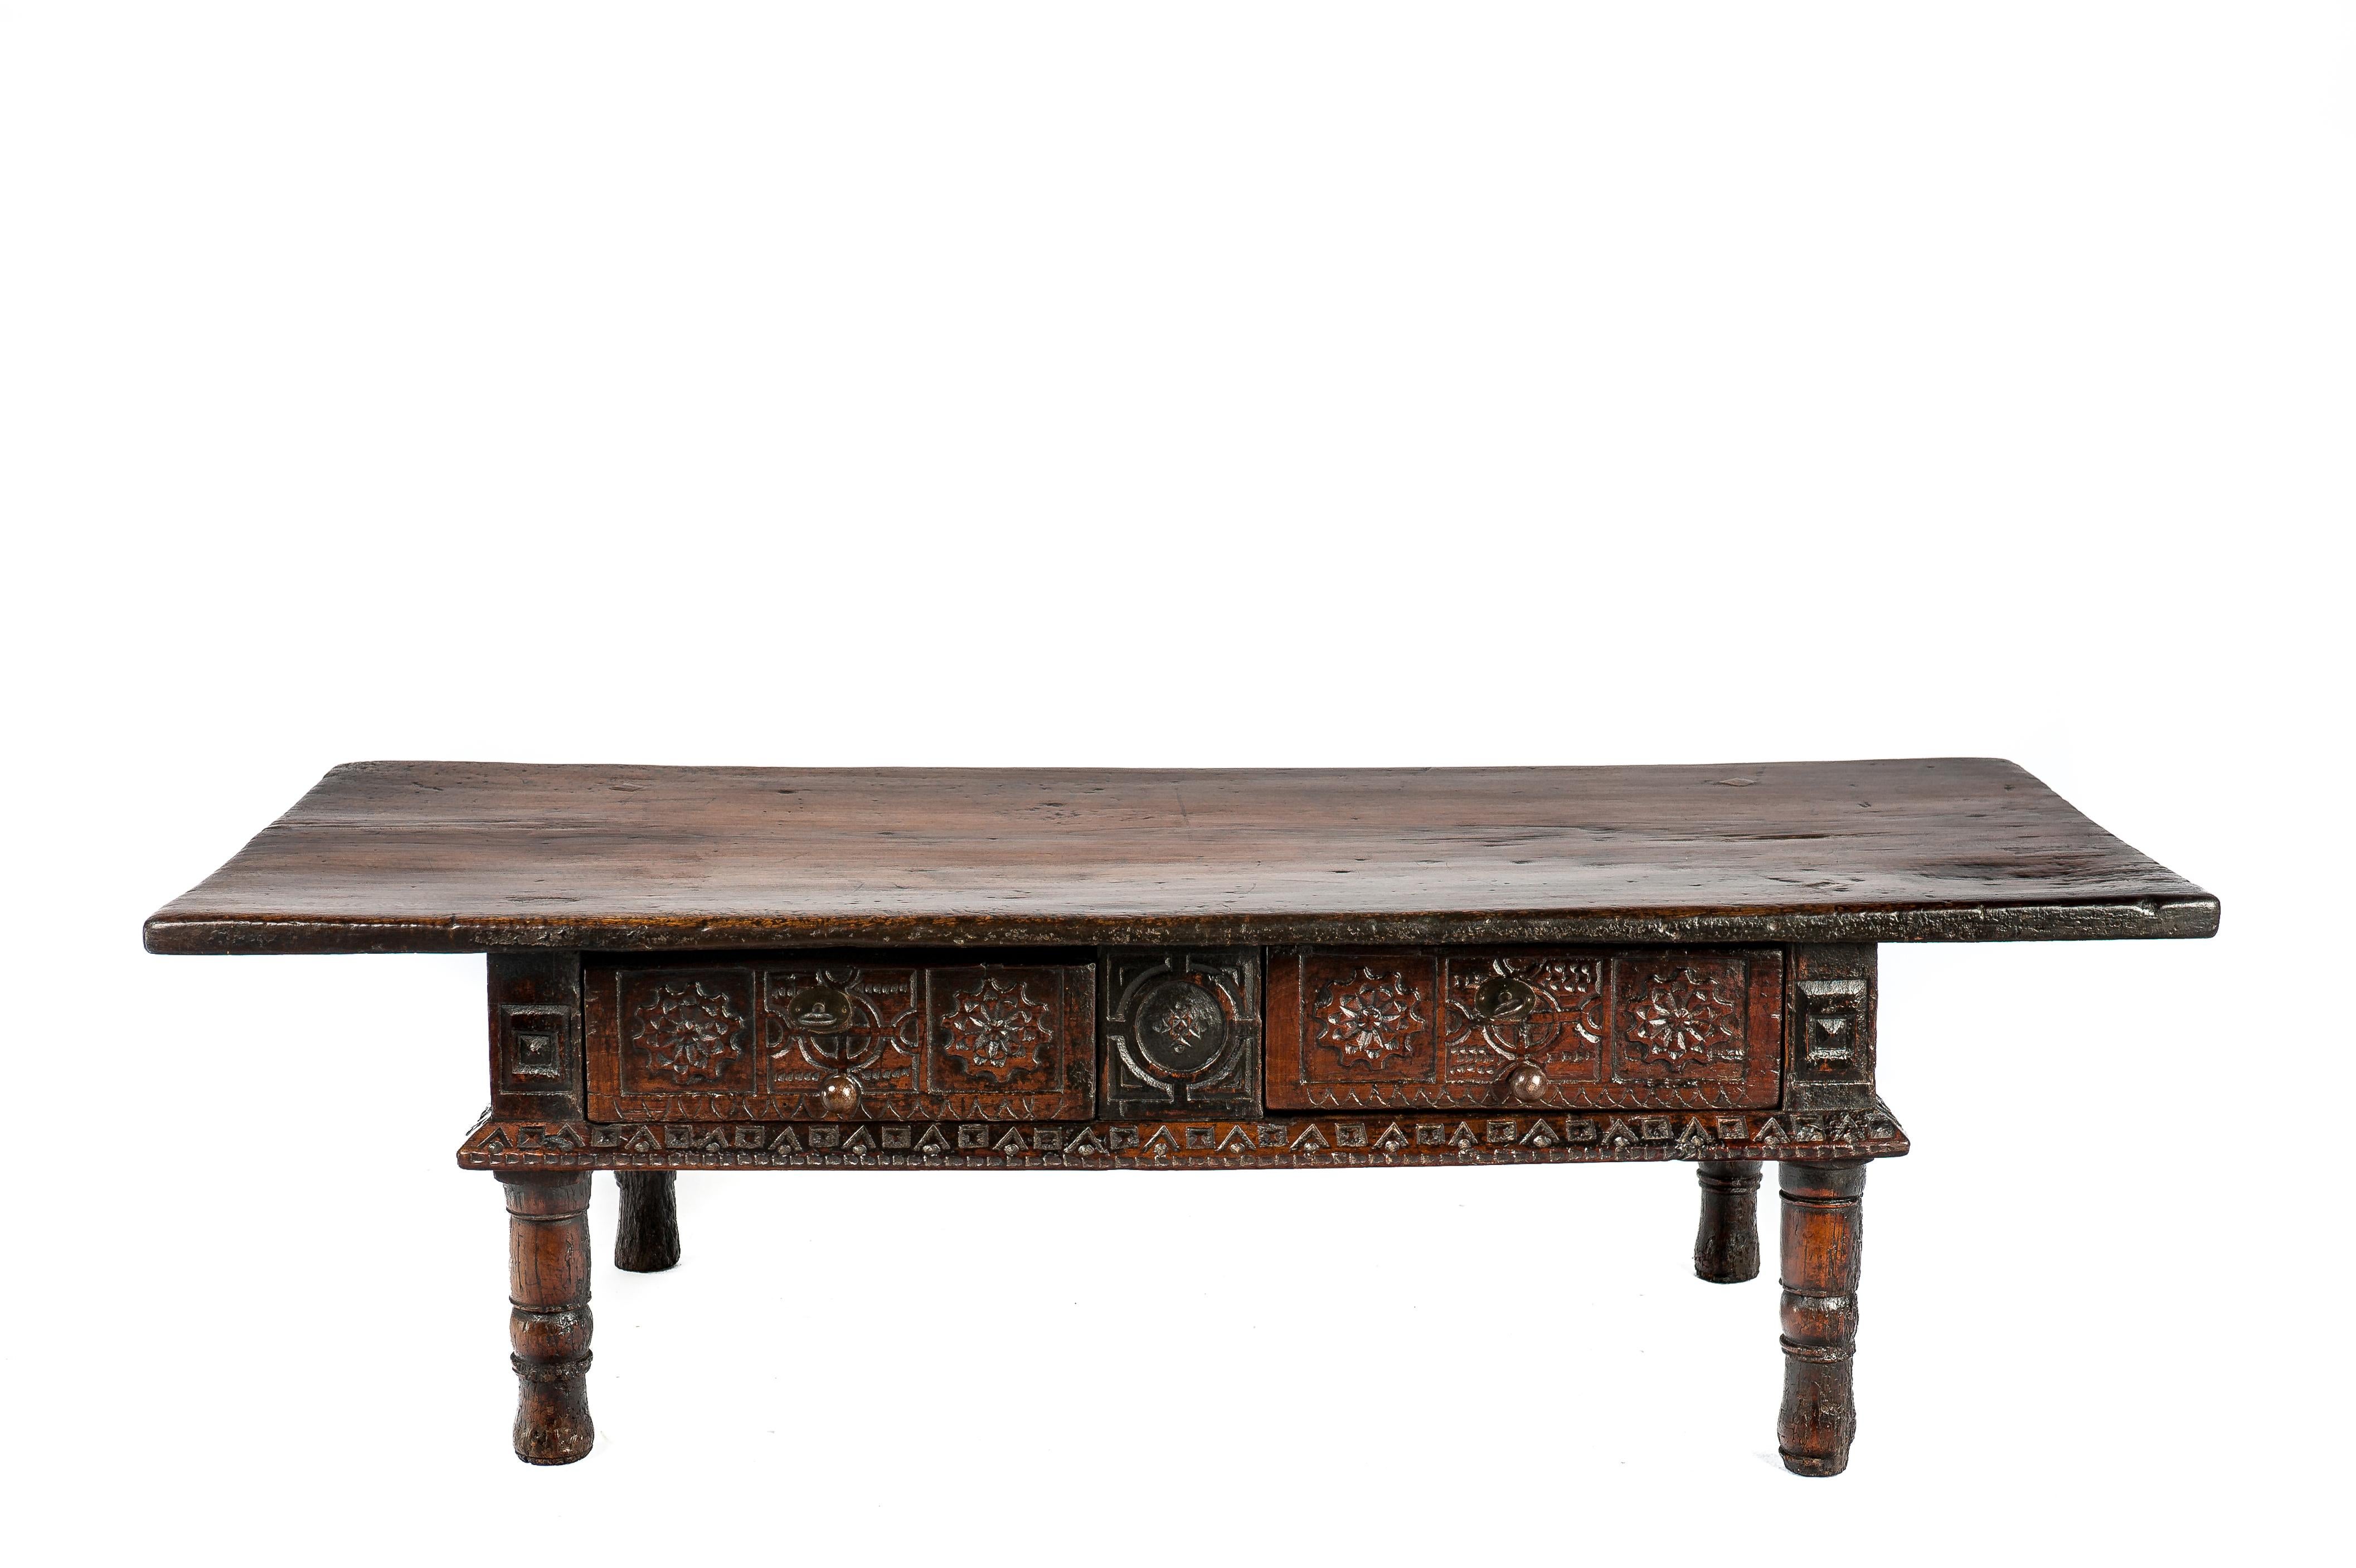 Forged Antique 17th Century Spanish Baroque Carved Chestnut Two Drawer Coffee Table